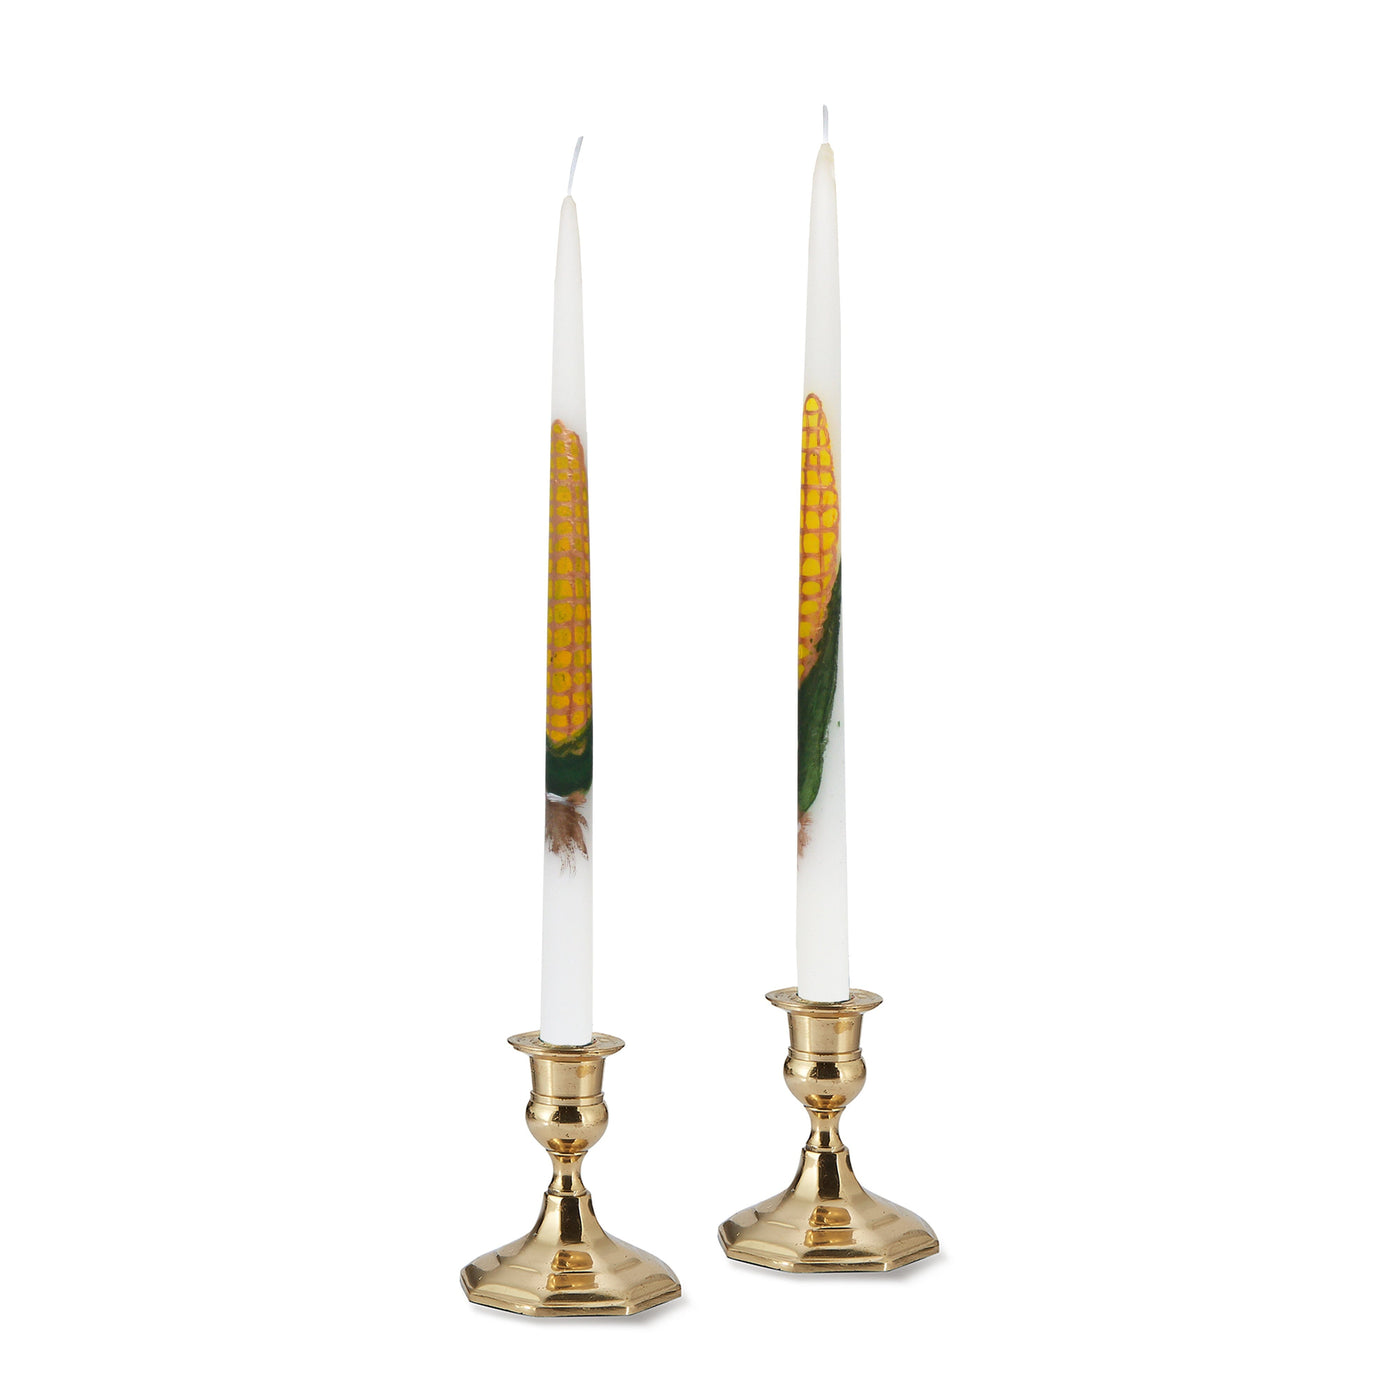 Painted Corn Taper Candles (2) Ikat Chefanie Gold 